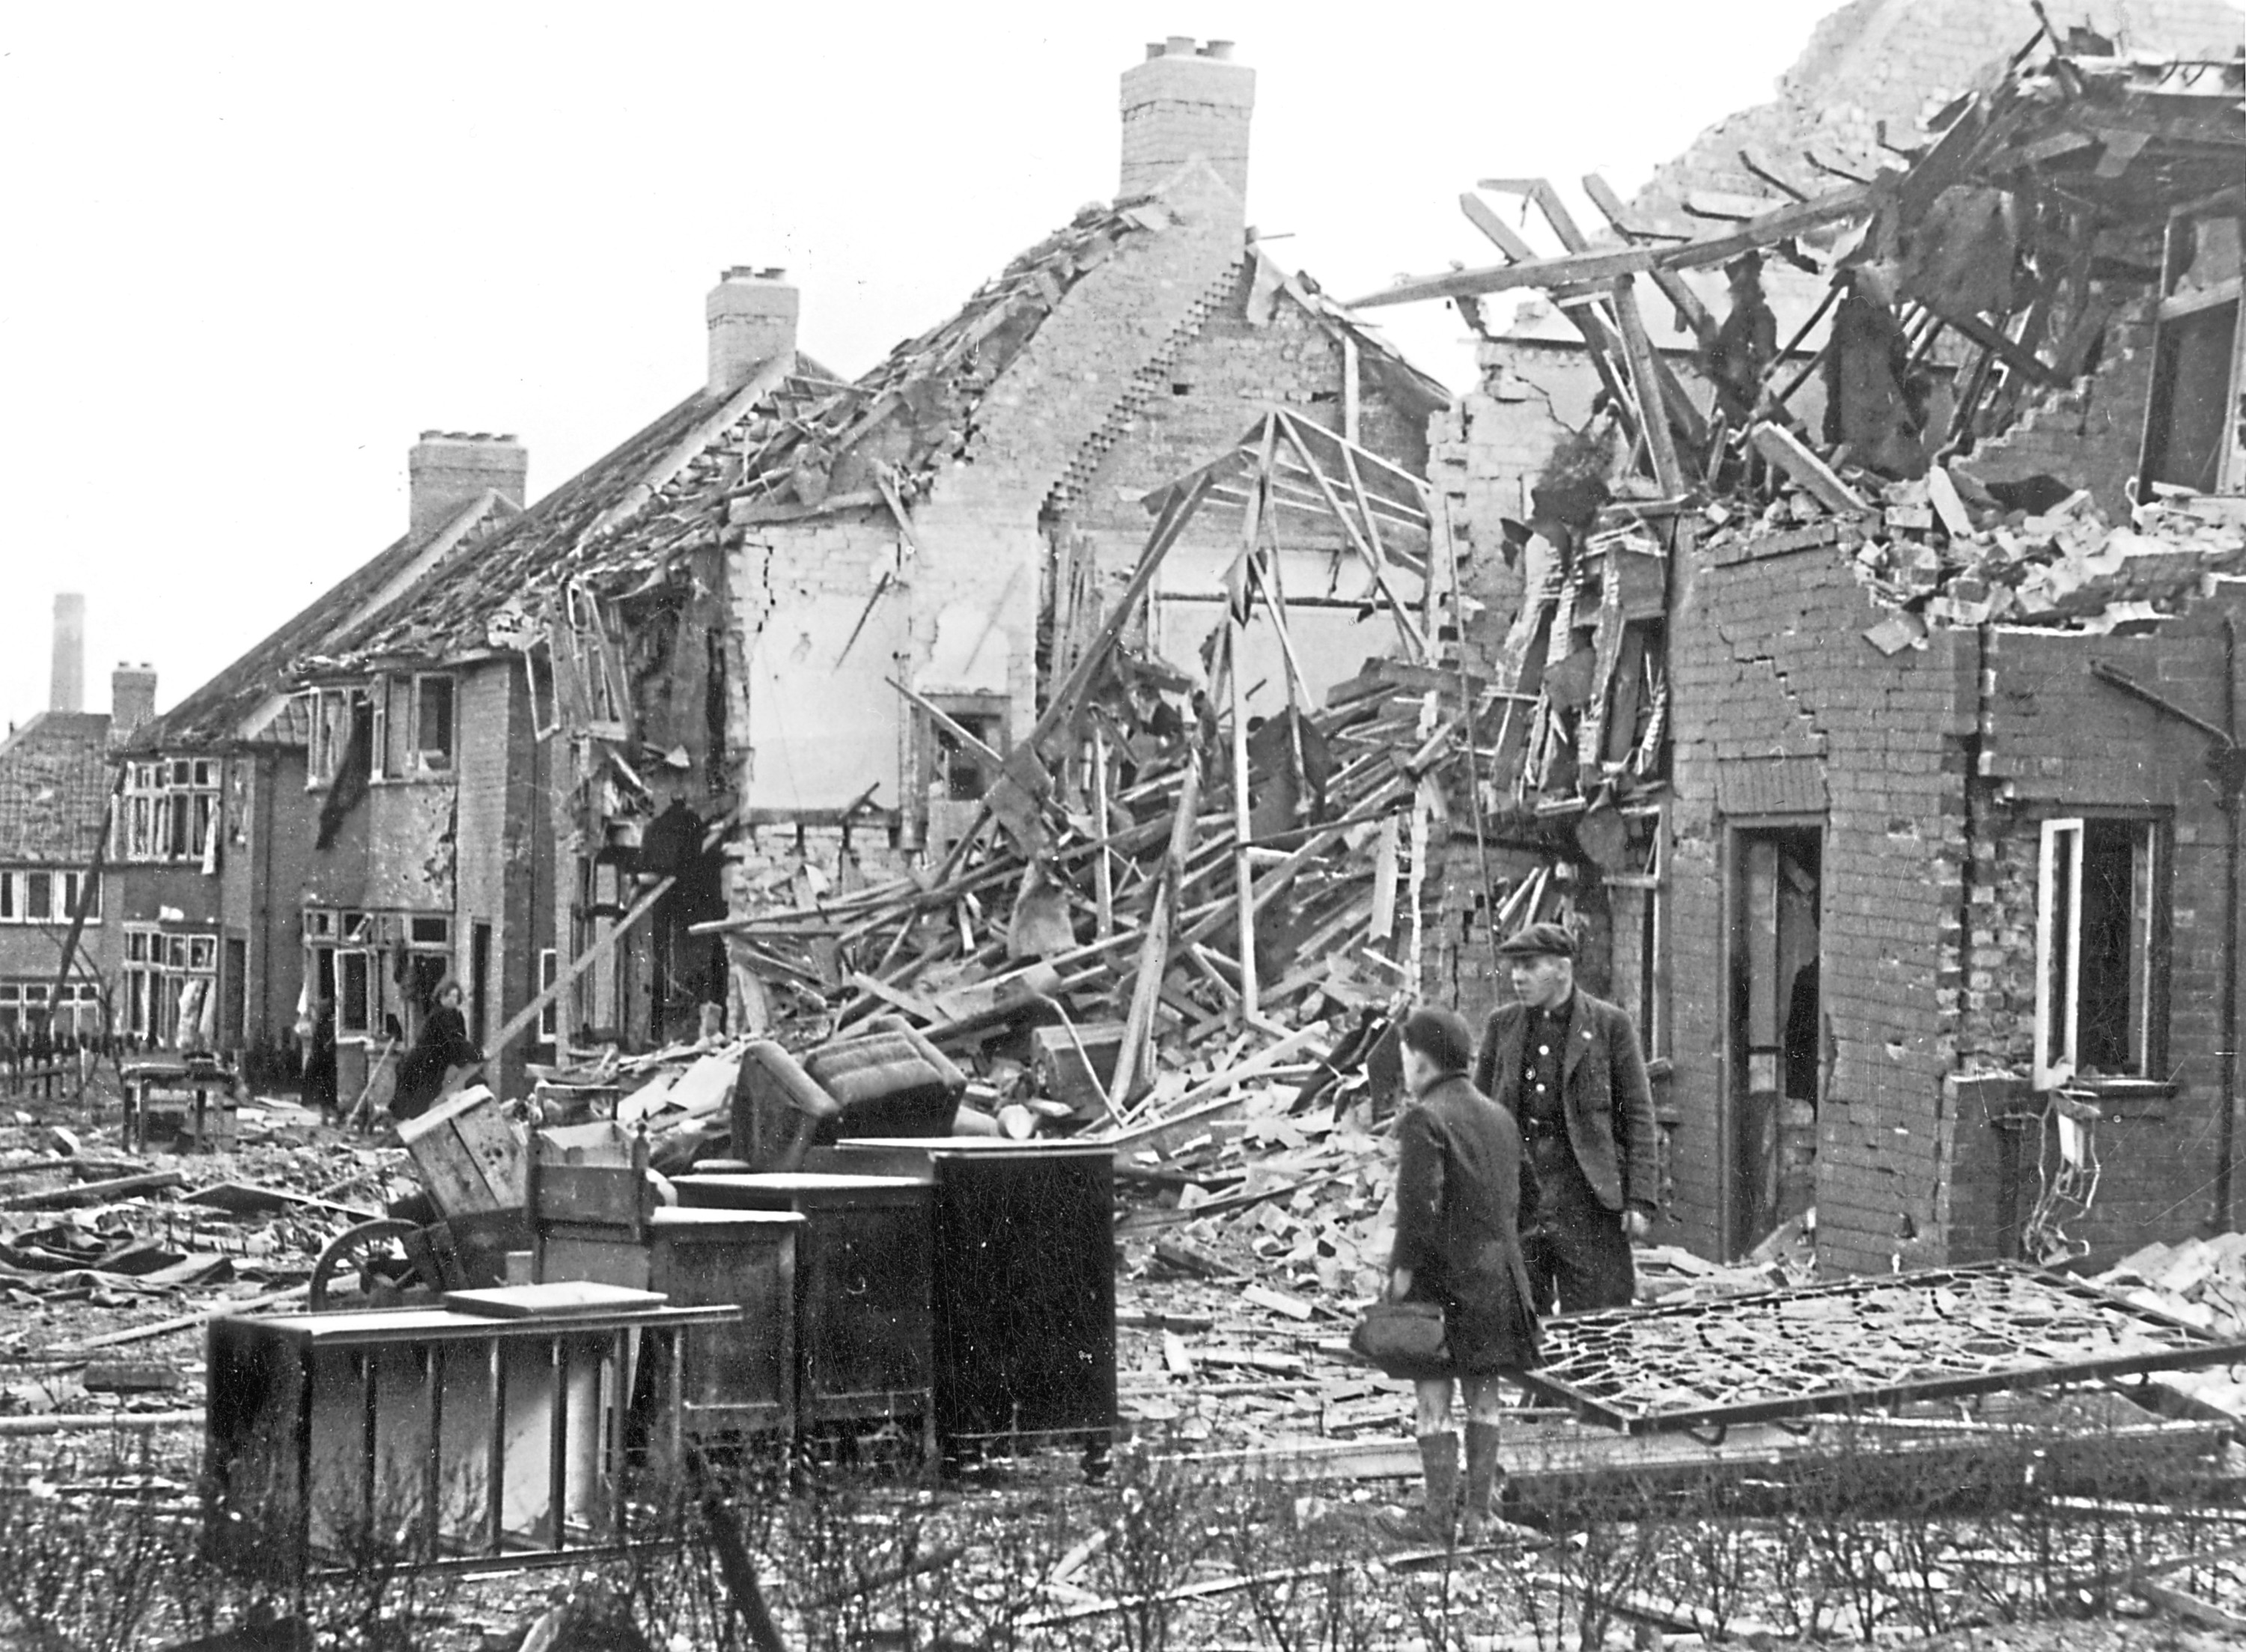 1st May 1942:  A house in York is reduced to rubble by a World War II 'Baedeker' raid, one of a series of German air raids on British cities of cultural significance.